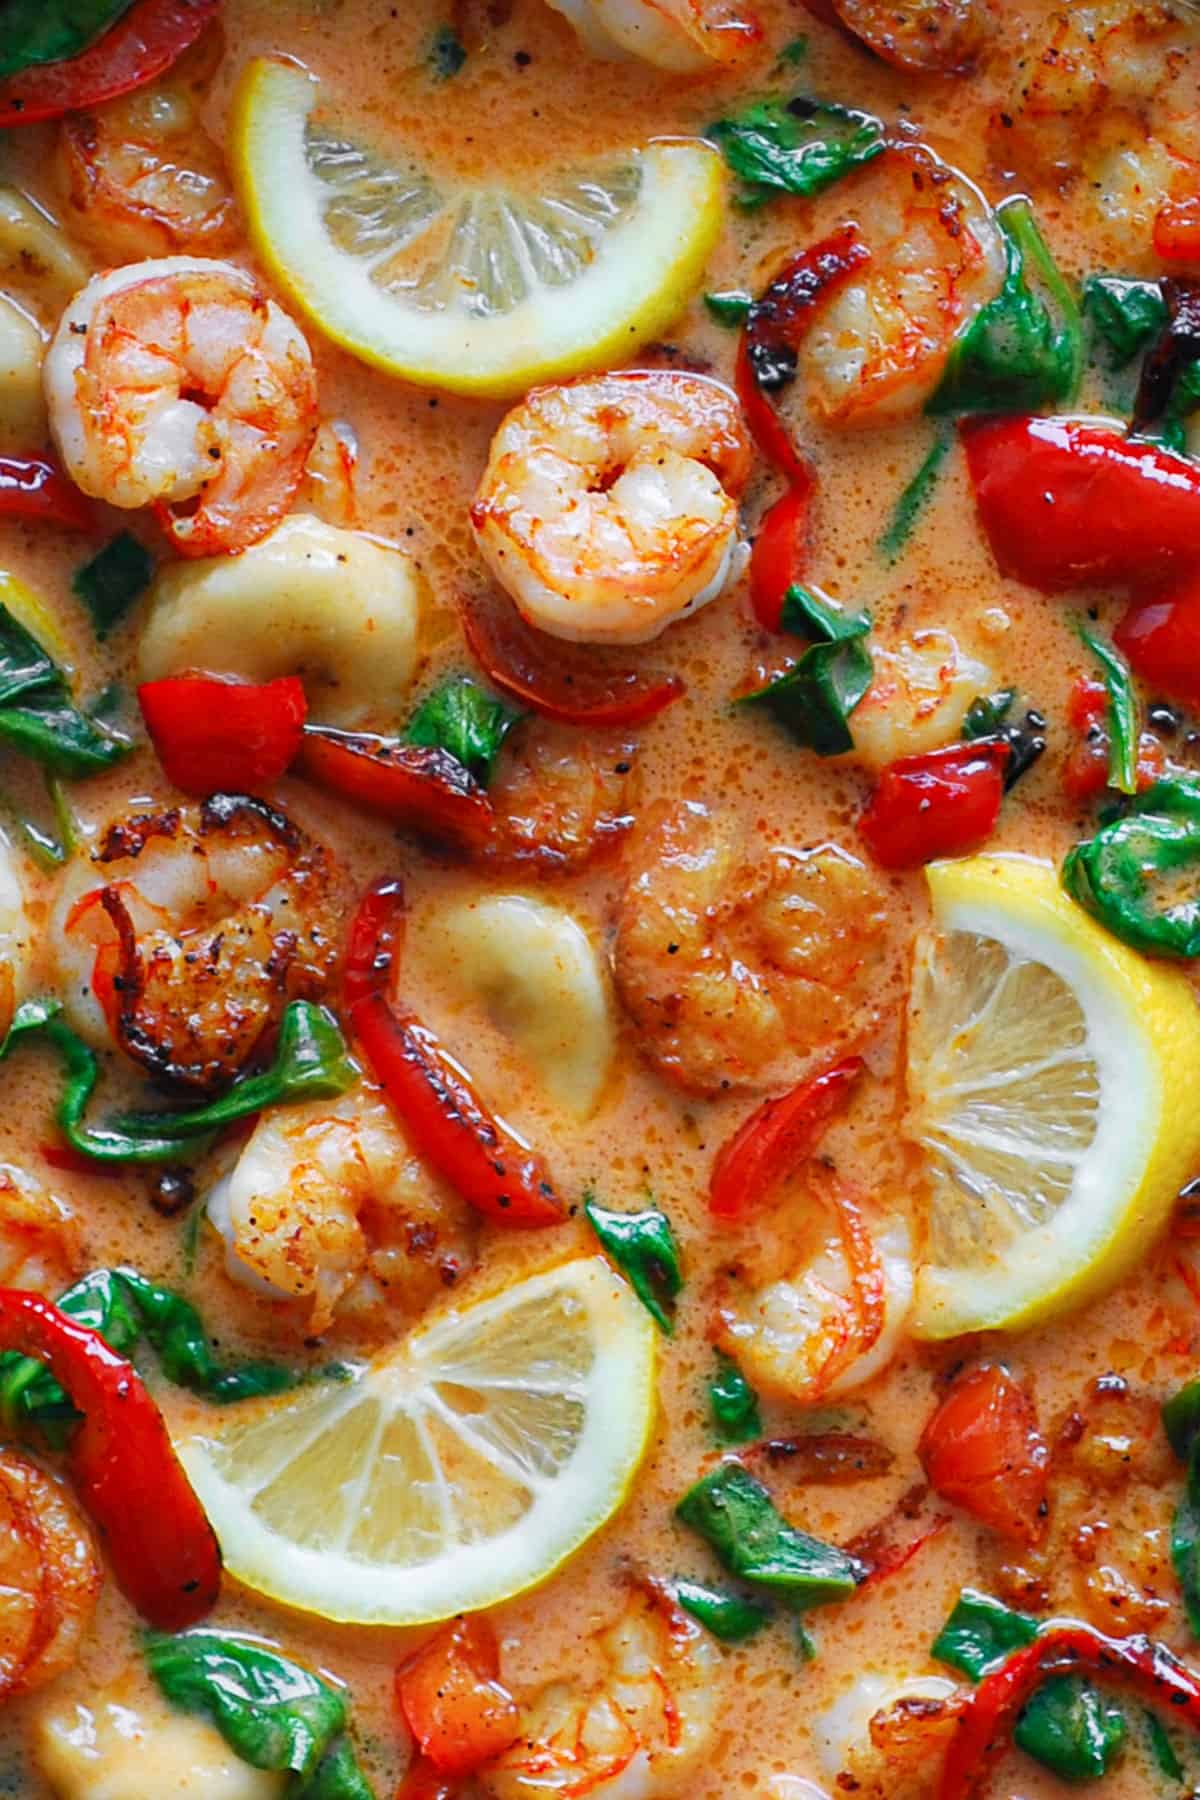 Red Coconut Curry Shrimp with Bananas, Bell Peppers, and Spinach - close-up photo.